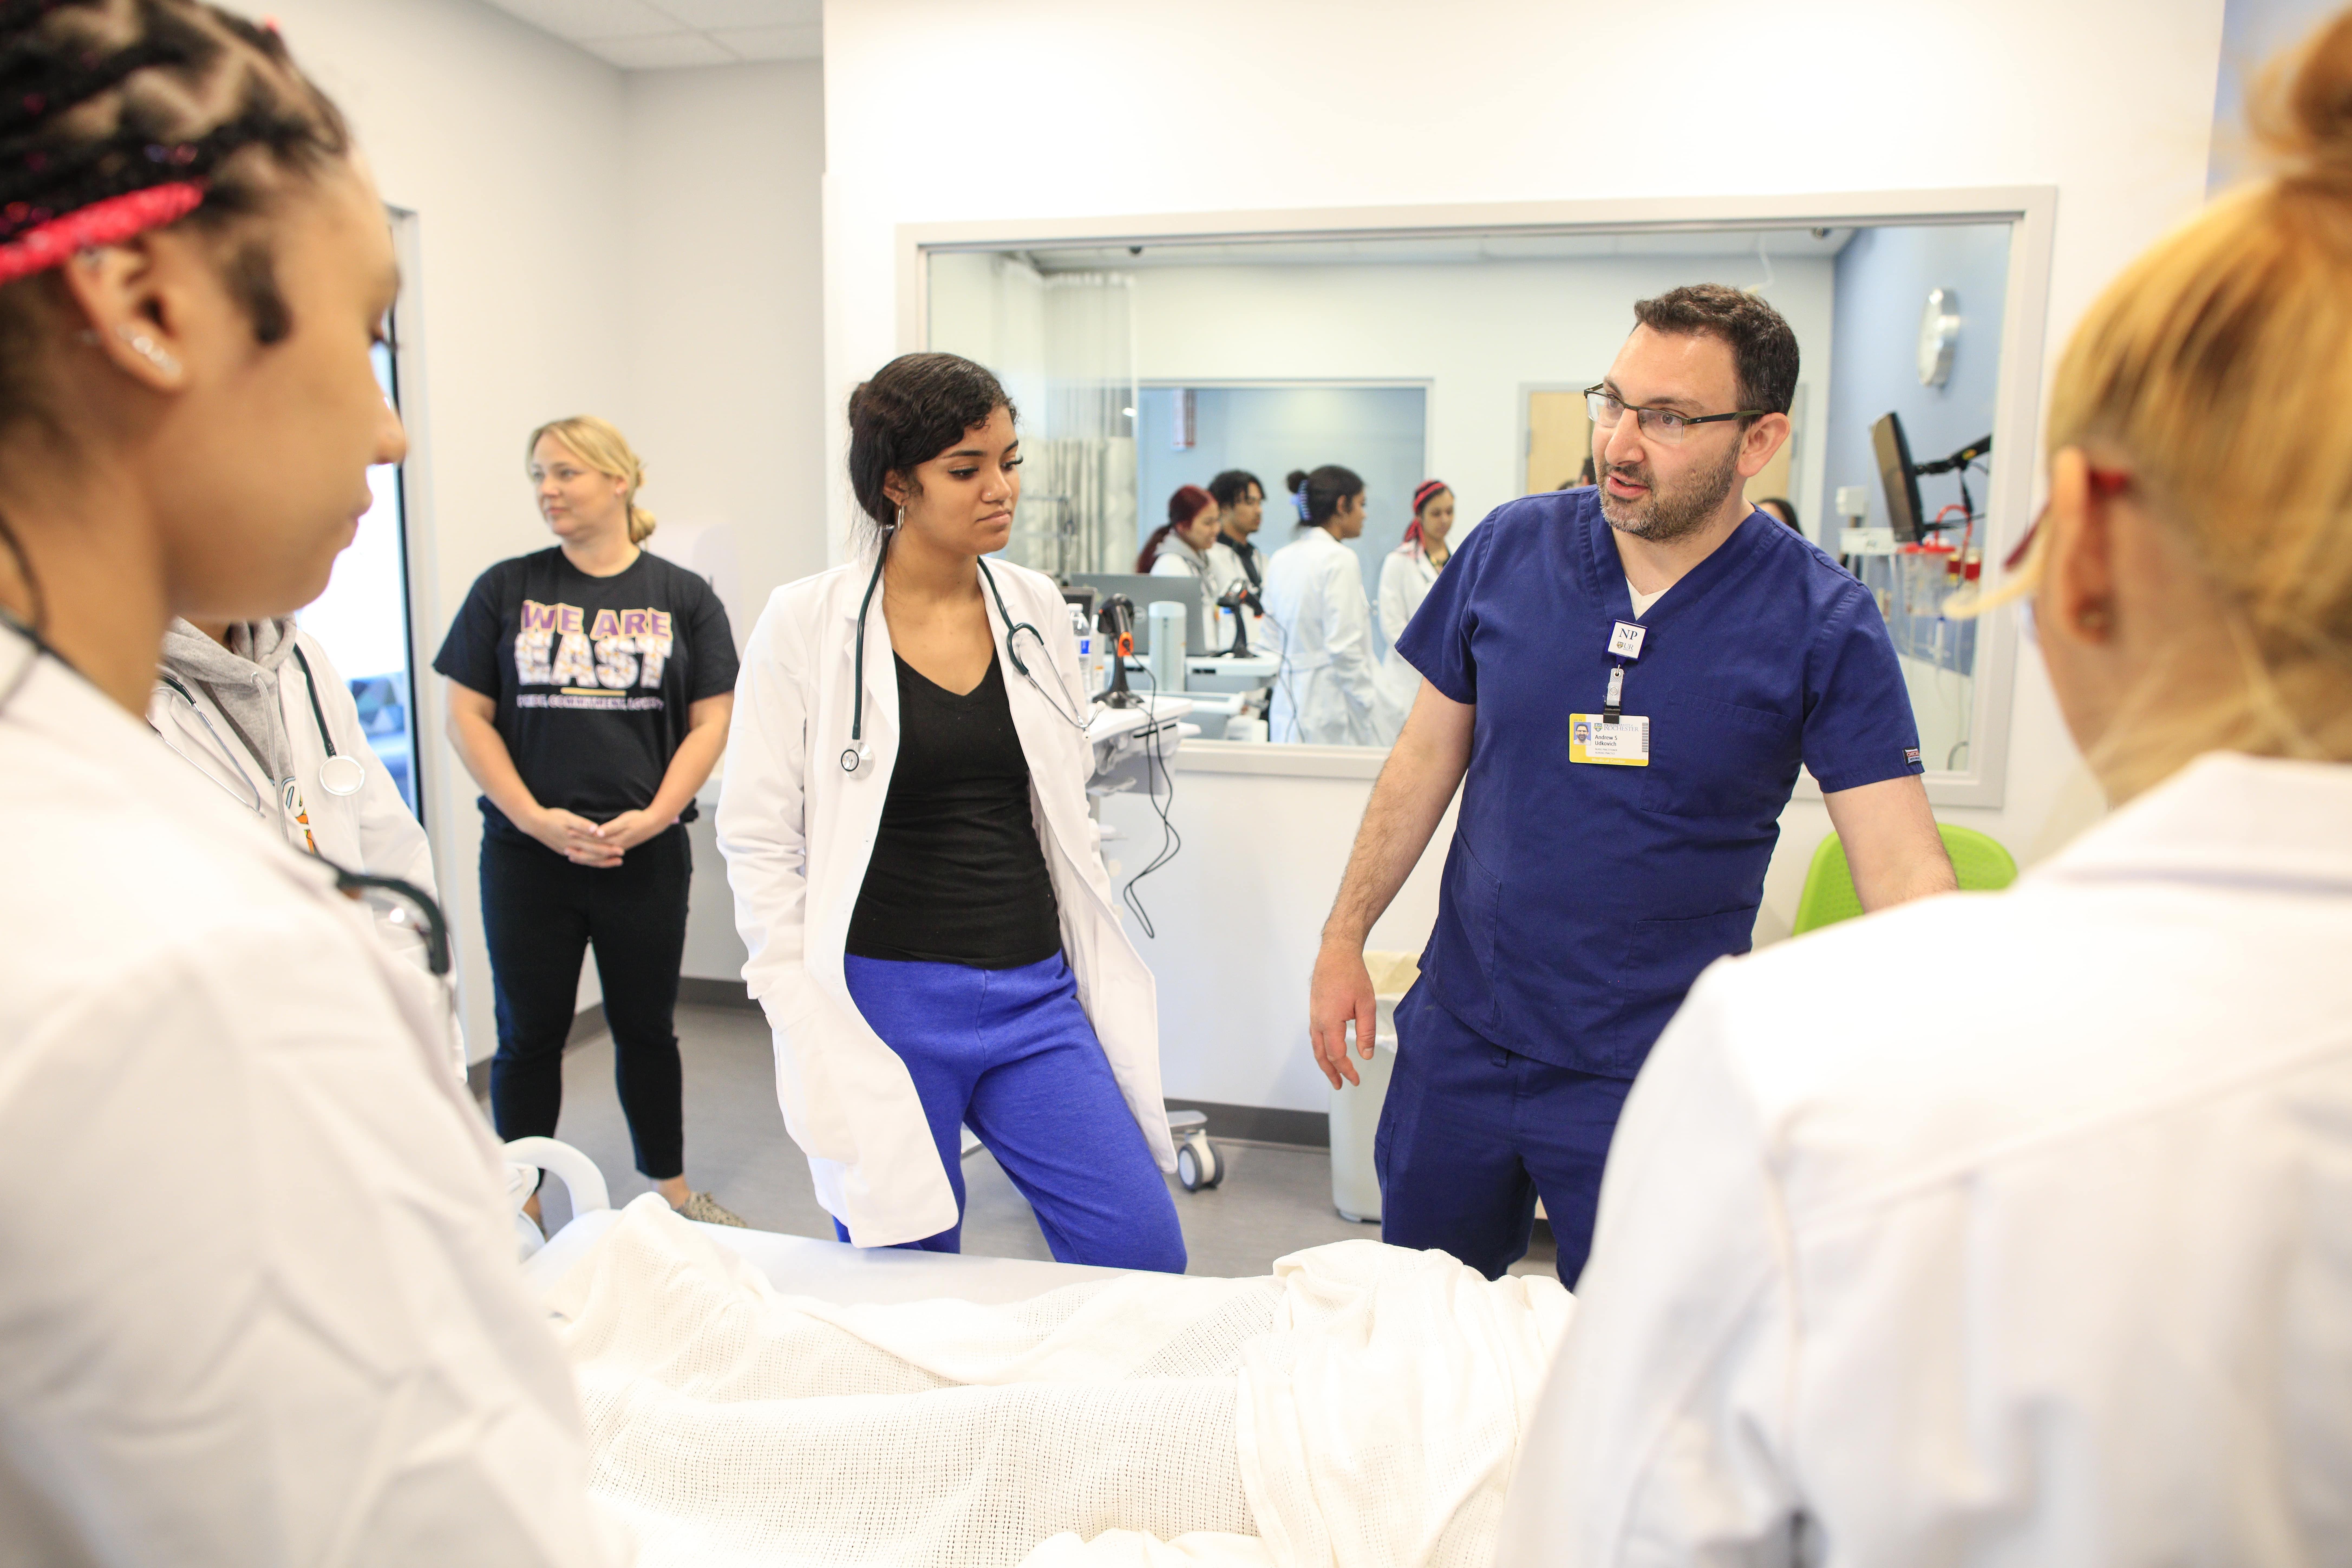 East High student Martha Beltran listens to pediatric nurse practitioner Andrew Udkovich during a lesson in the School of Nursing skills lab.